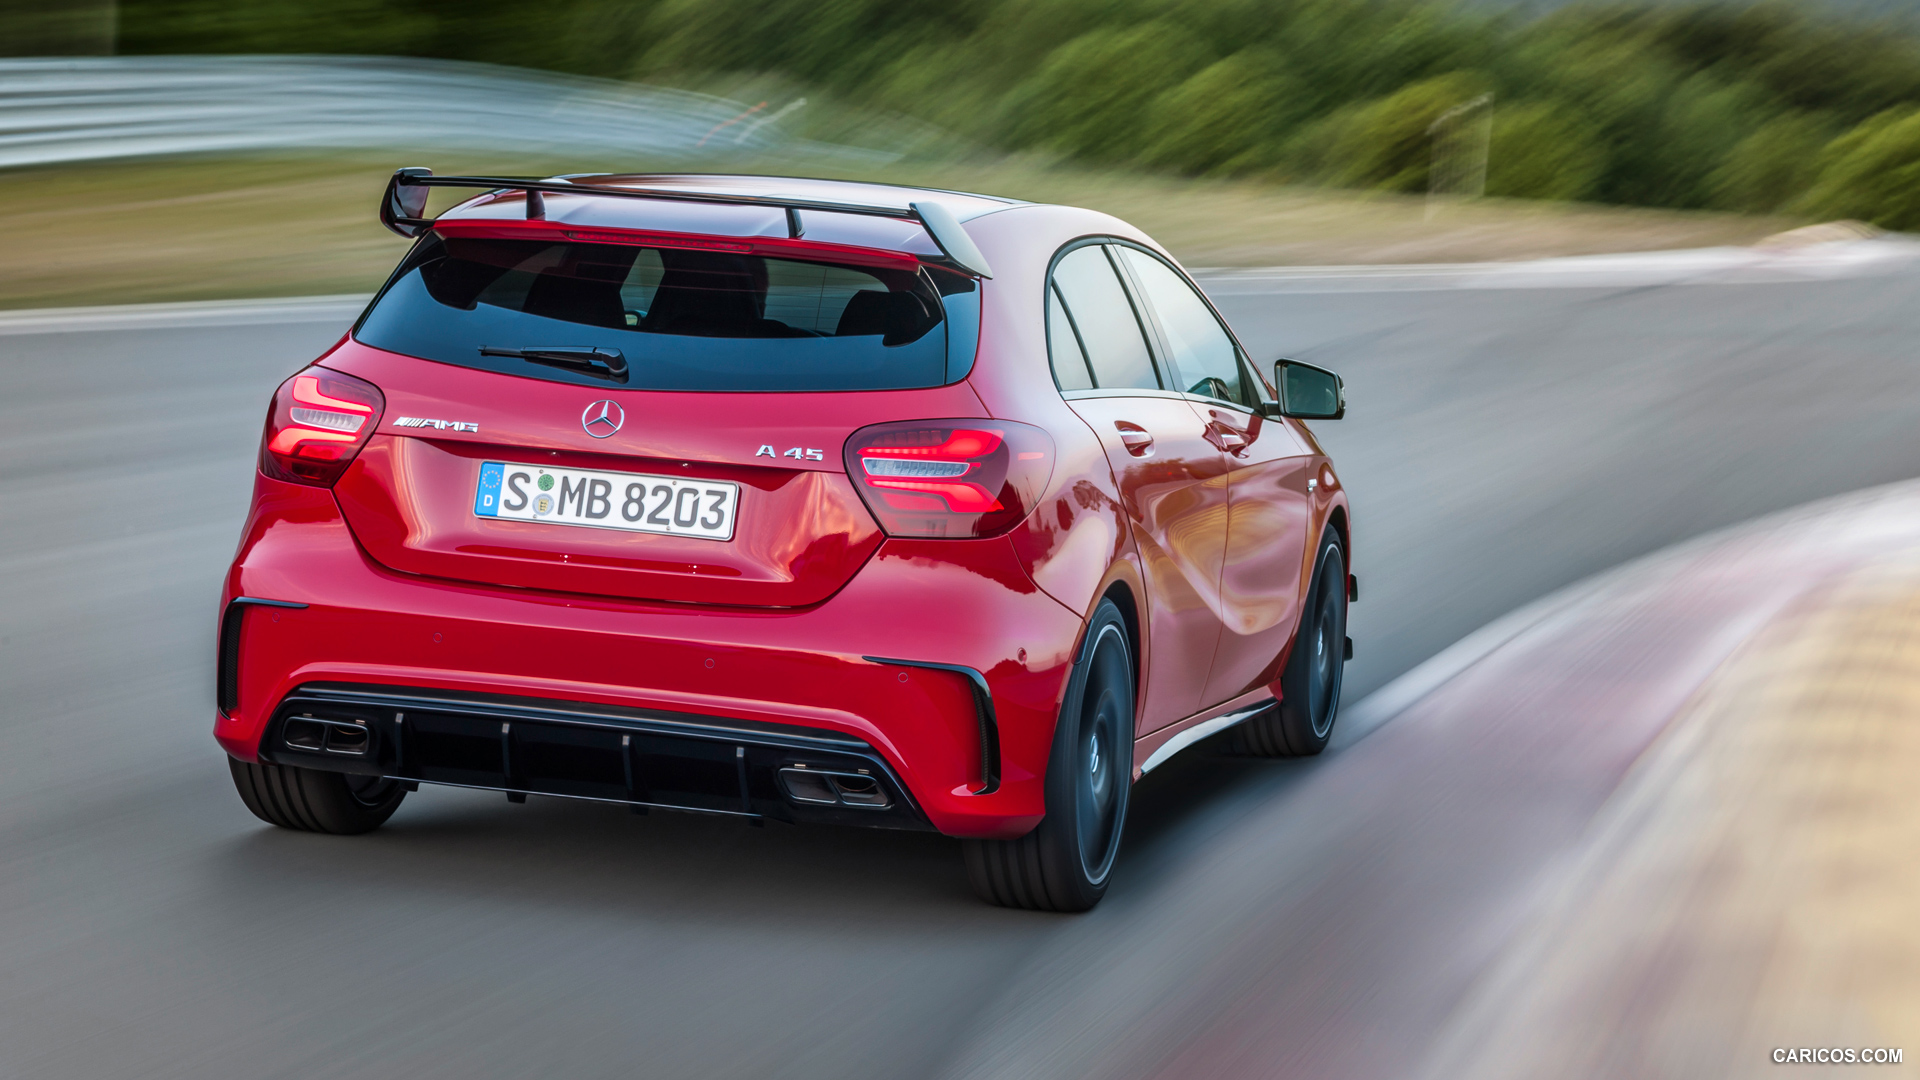 2016 Mercedes-AMG A45 AMG Exclusive (Jupiter Red) - Rear, #12 of 15